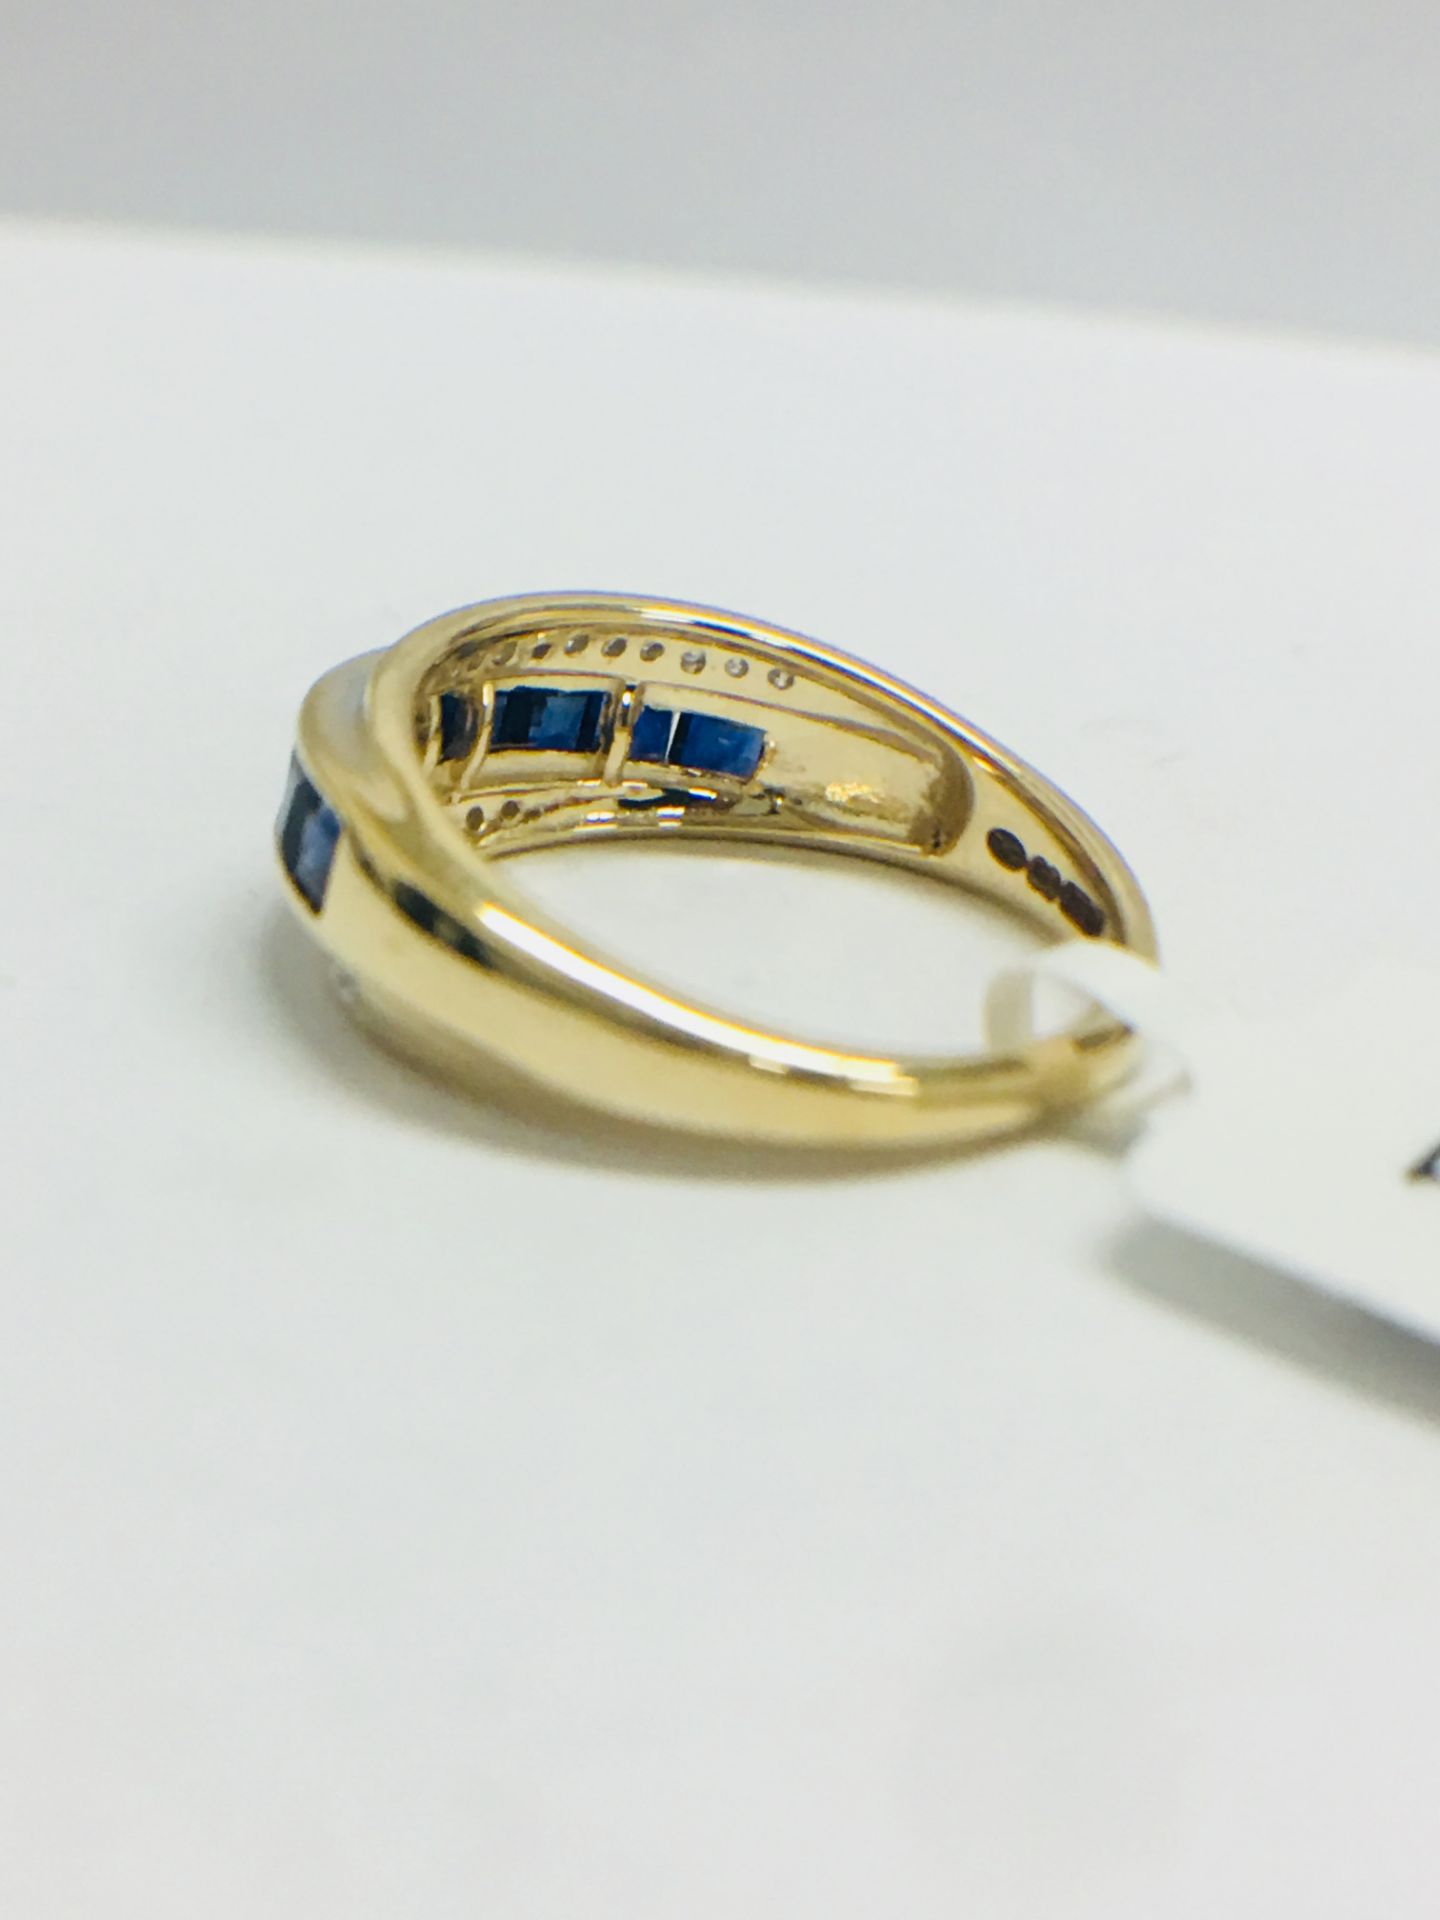 9ct Yellow Gold Diamond Sapphire Crossover Style Ring - Image 5 of 11